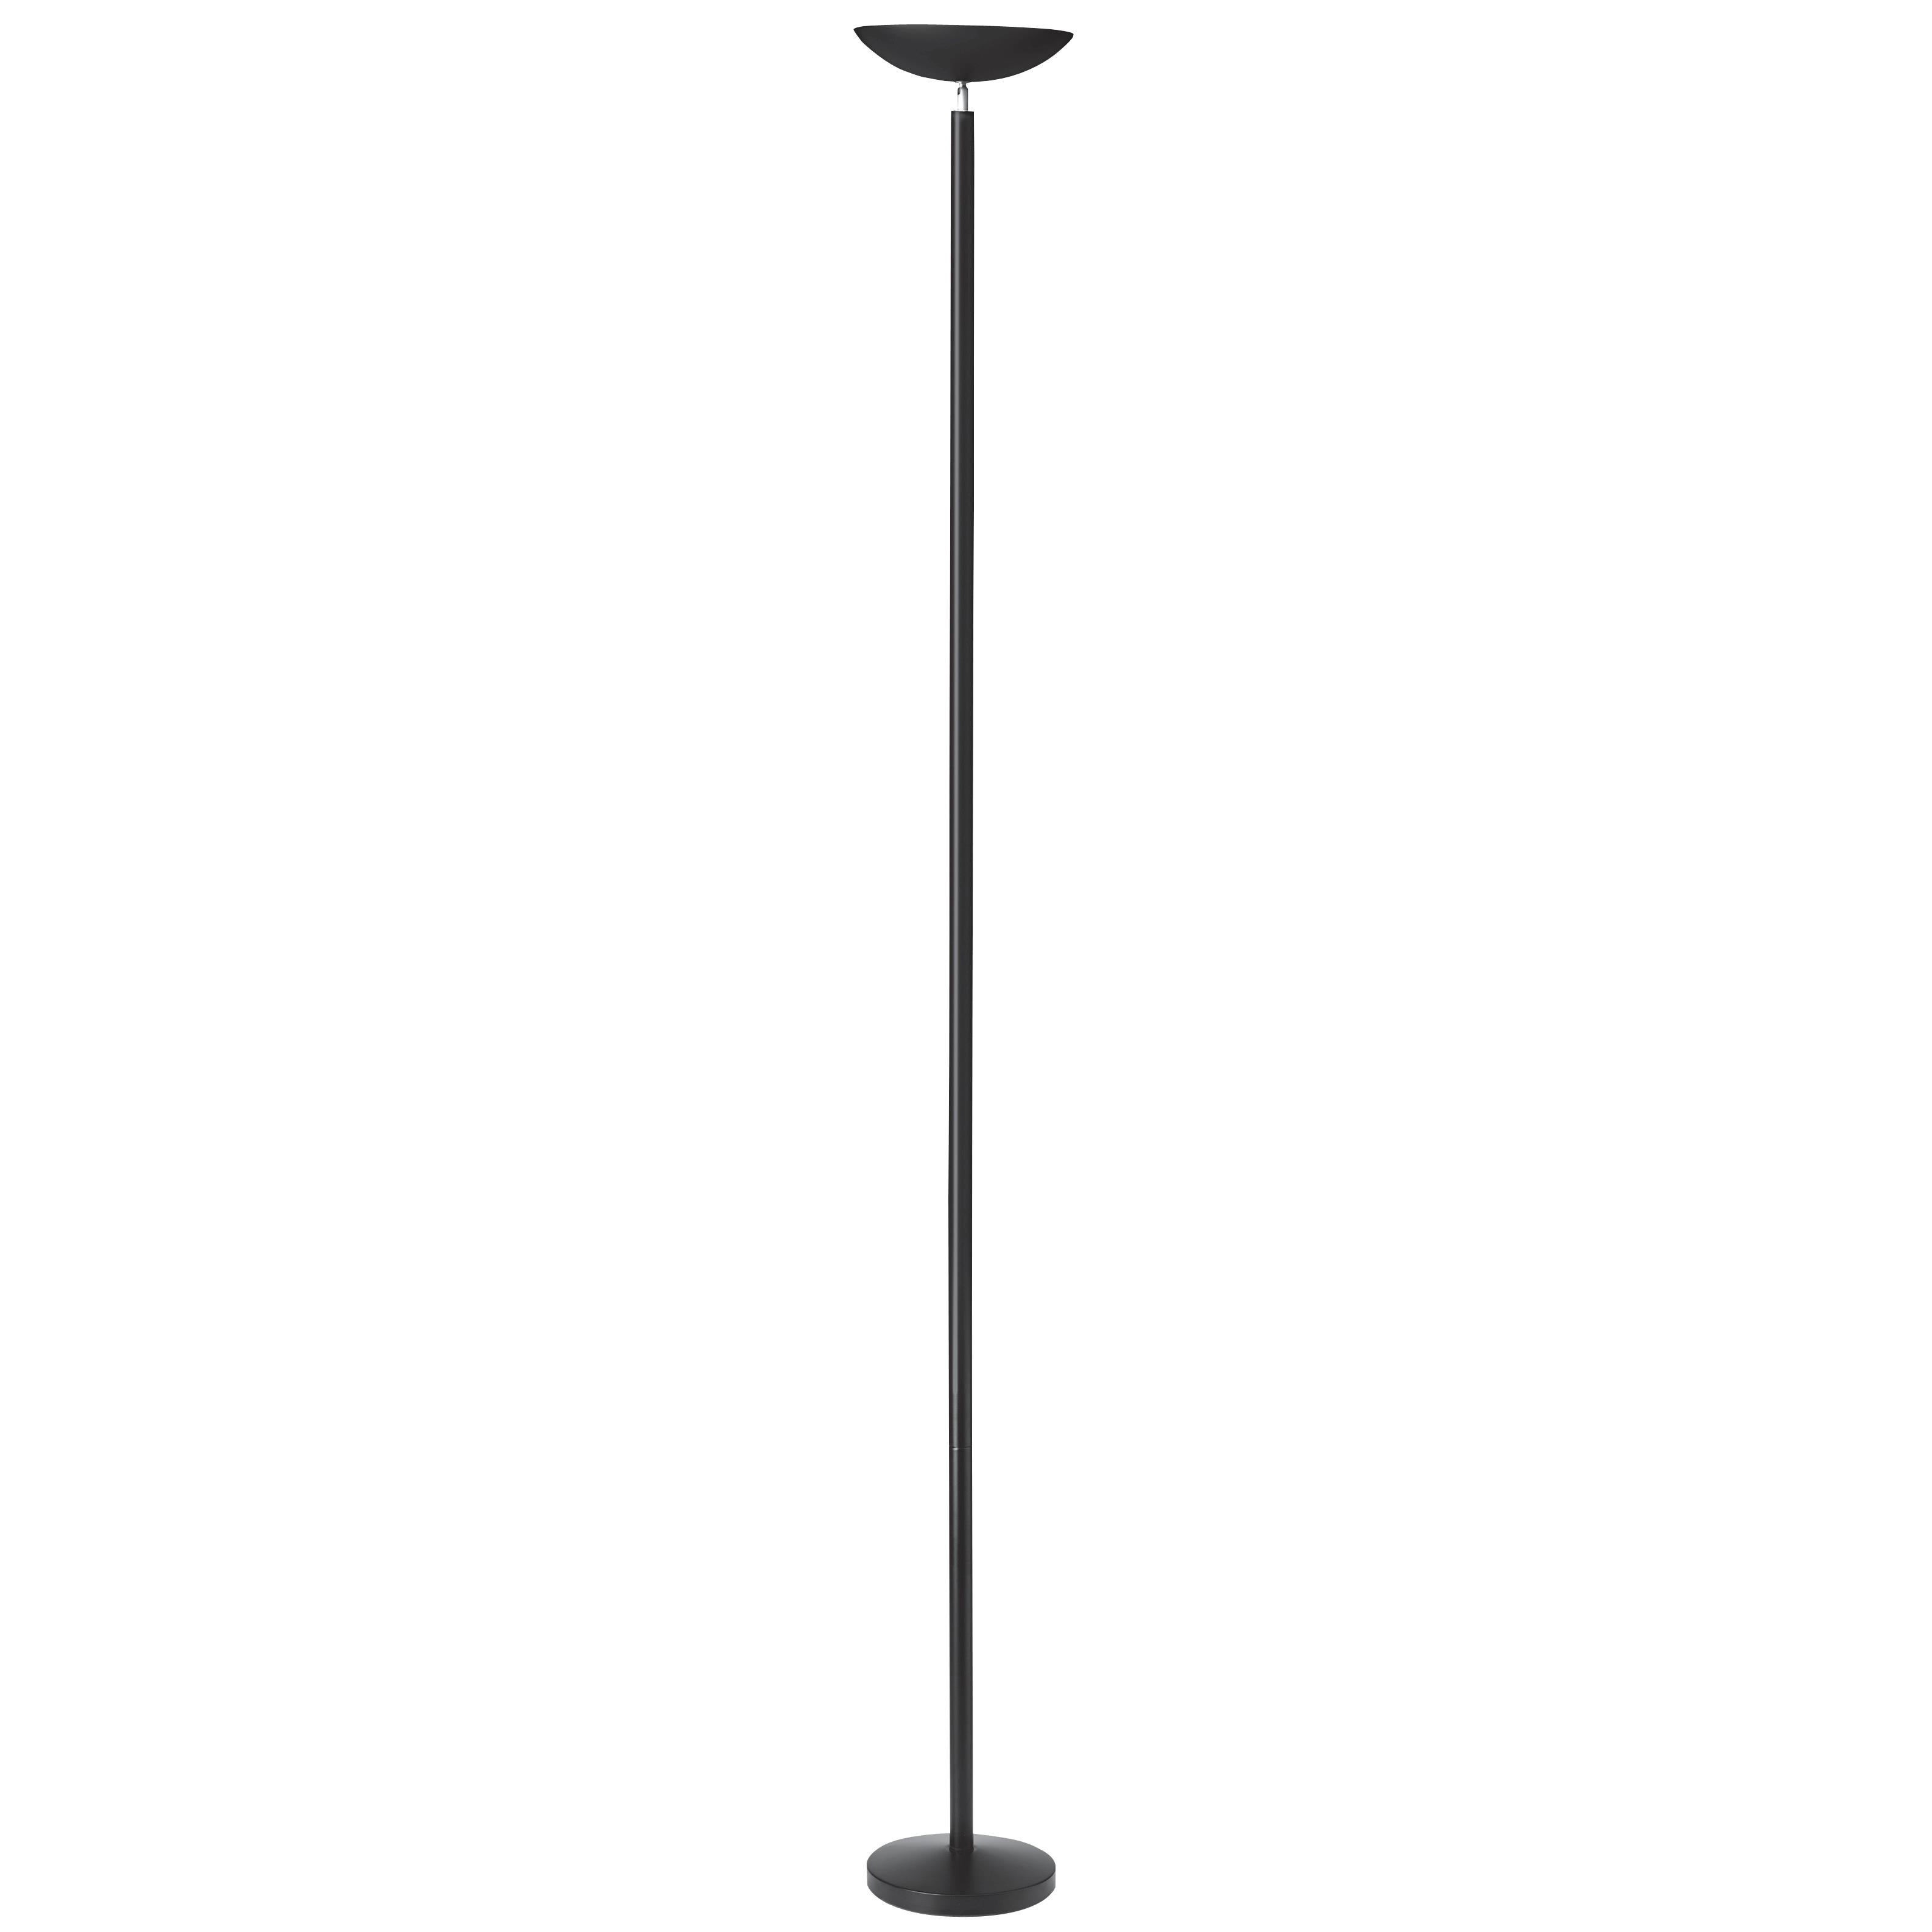 Unilux First Bowl Uplighter Floor Lamp 230w Height Of 1800mm pertaining to size 3172 X 3172